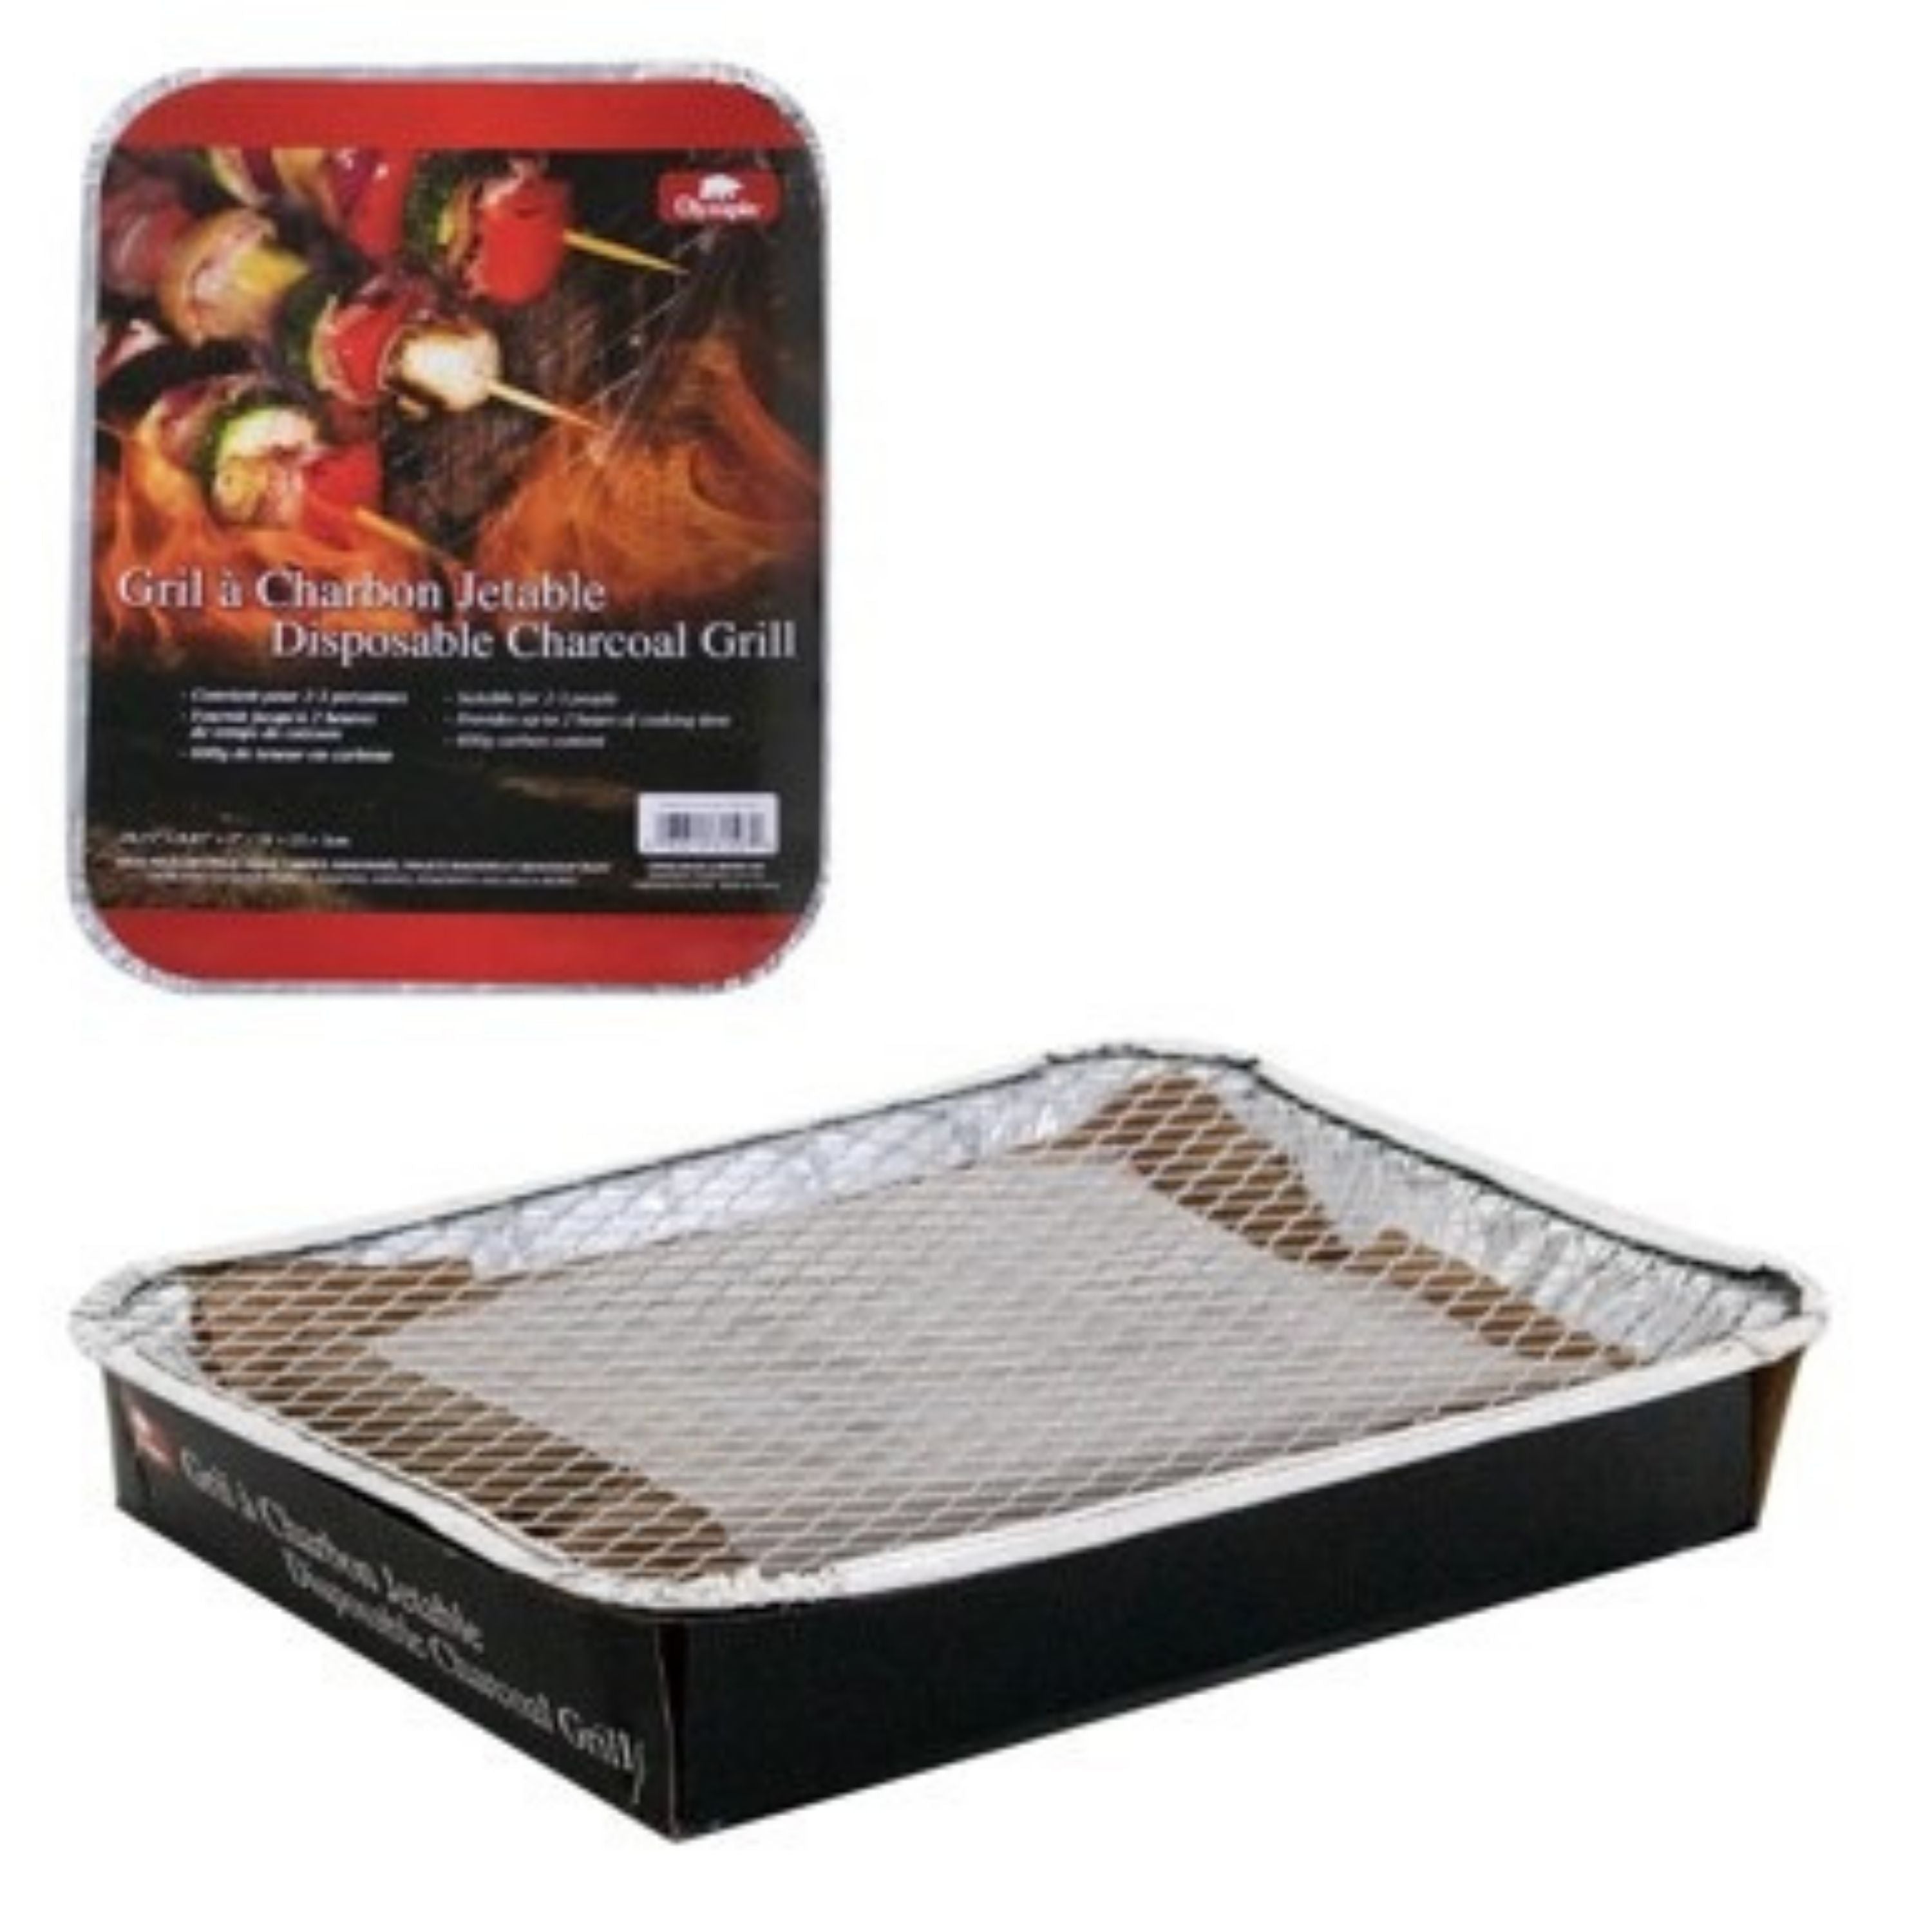 Disposable charcoal grill